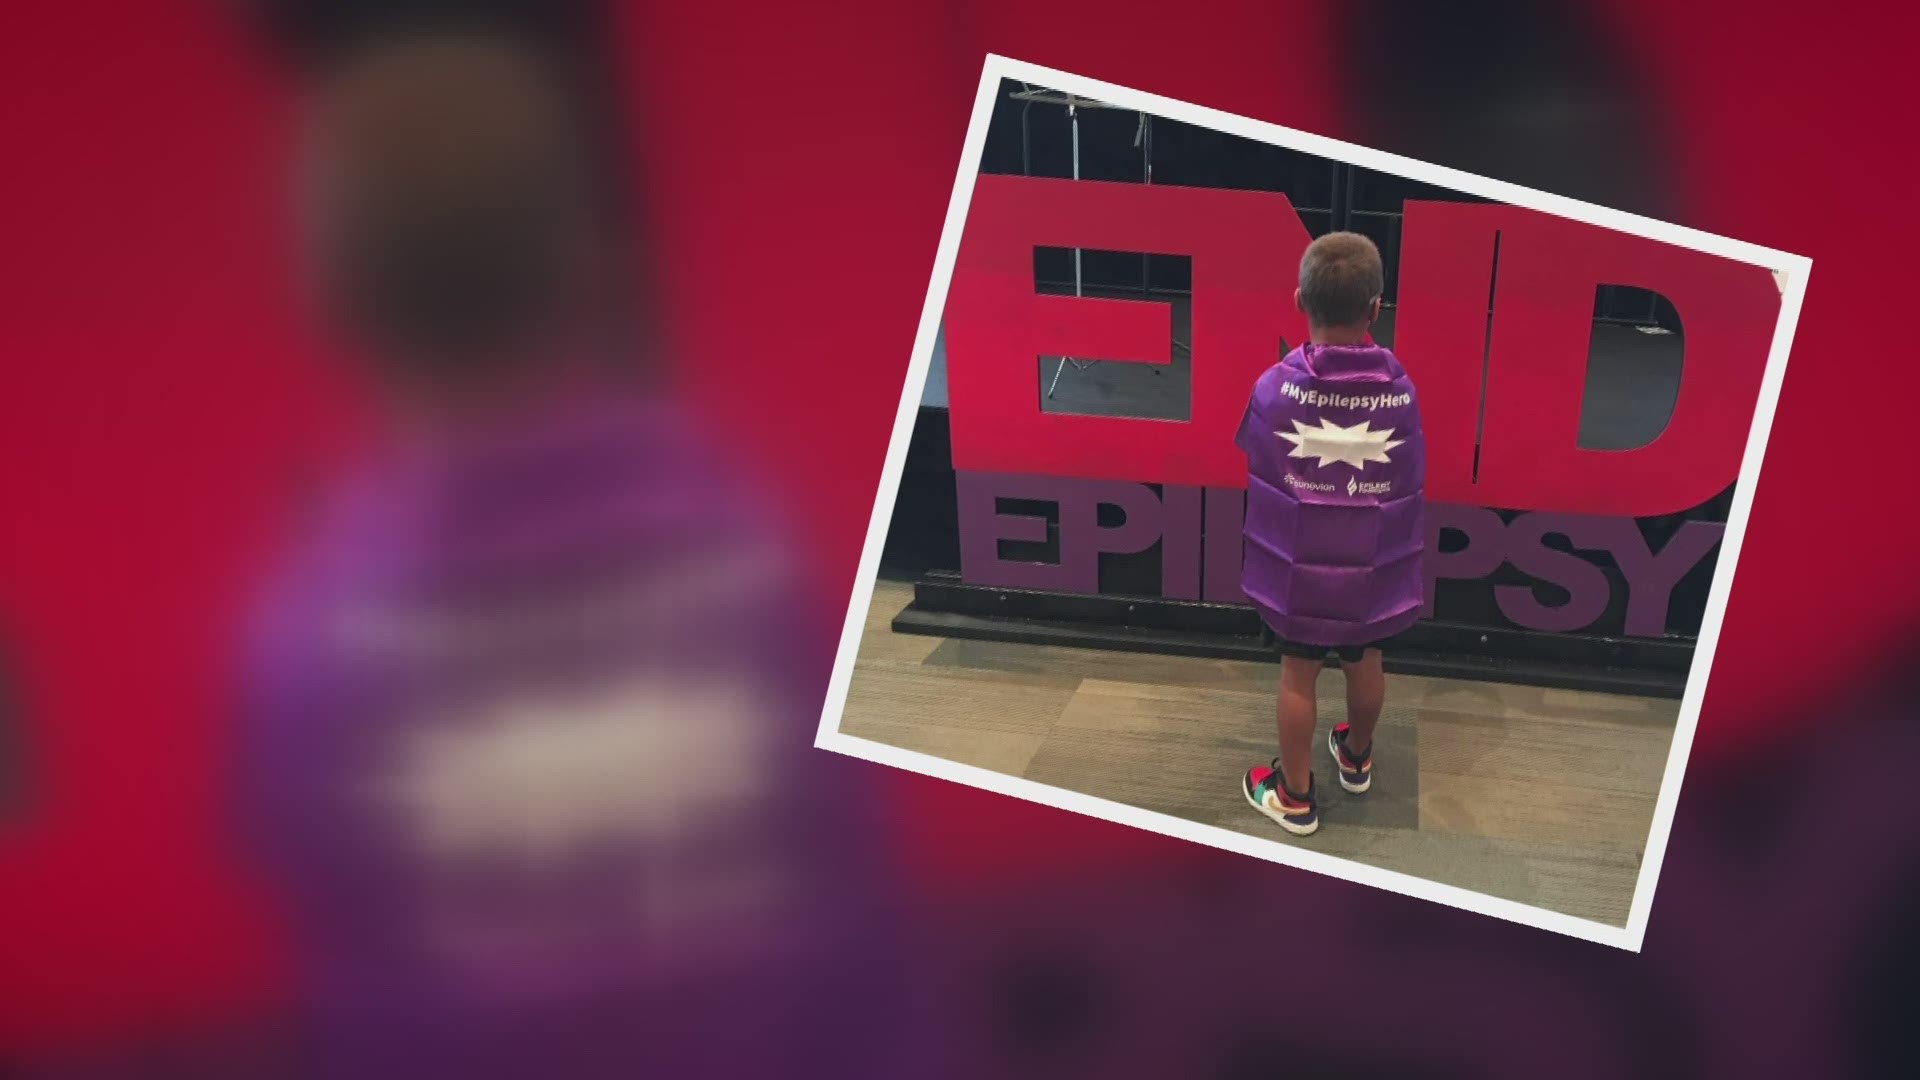 Caleb Hines has been battling epilepsy since he was 3 years old.